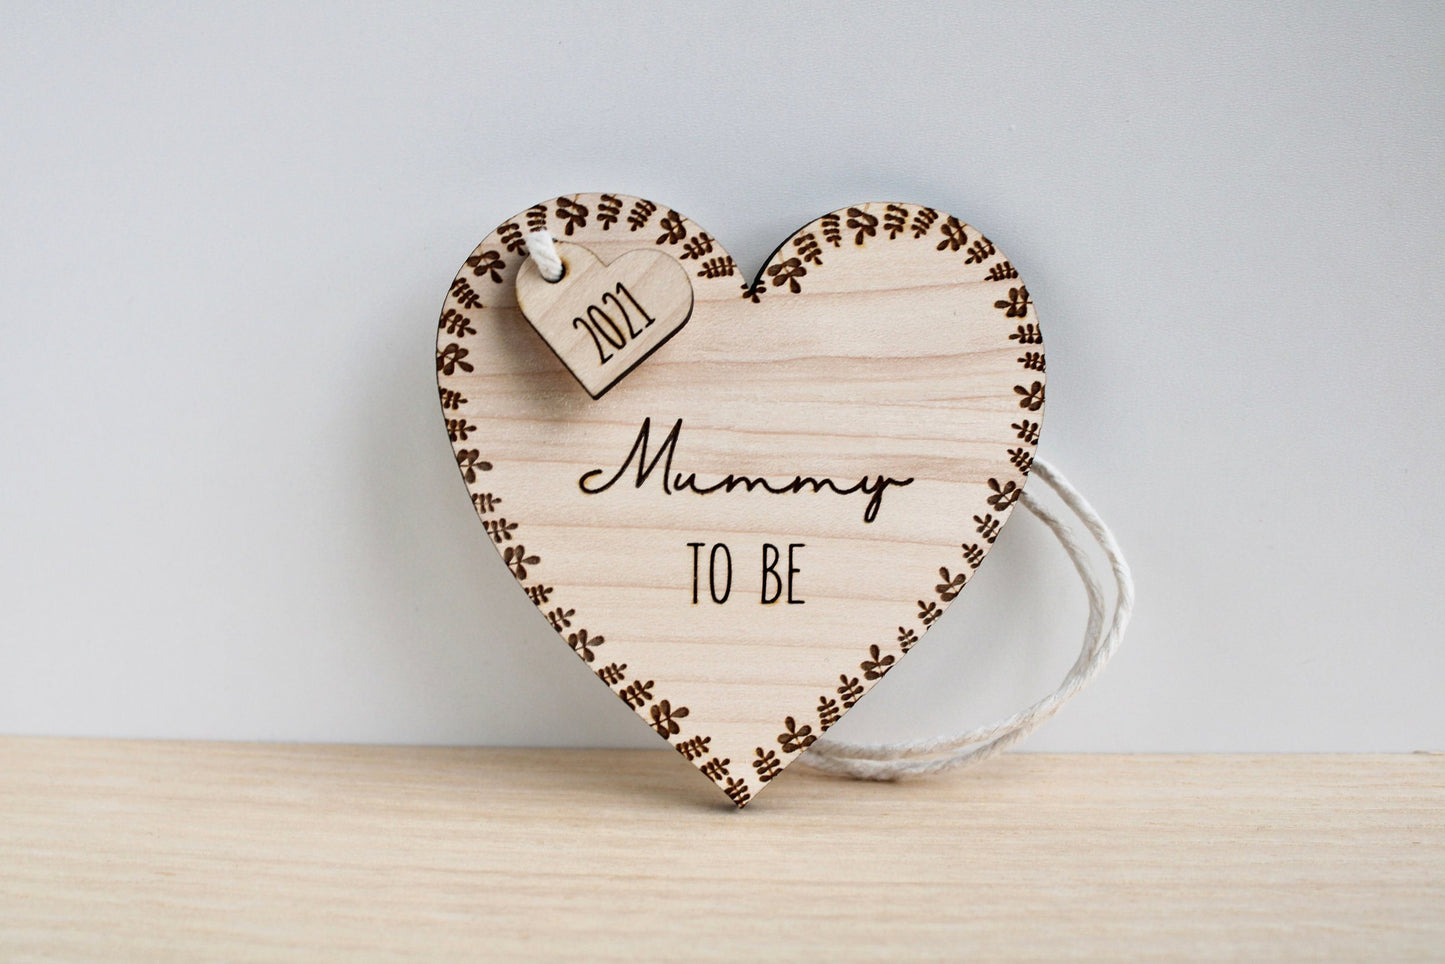 Mummy to be gift with leaf design